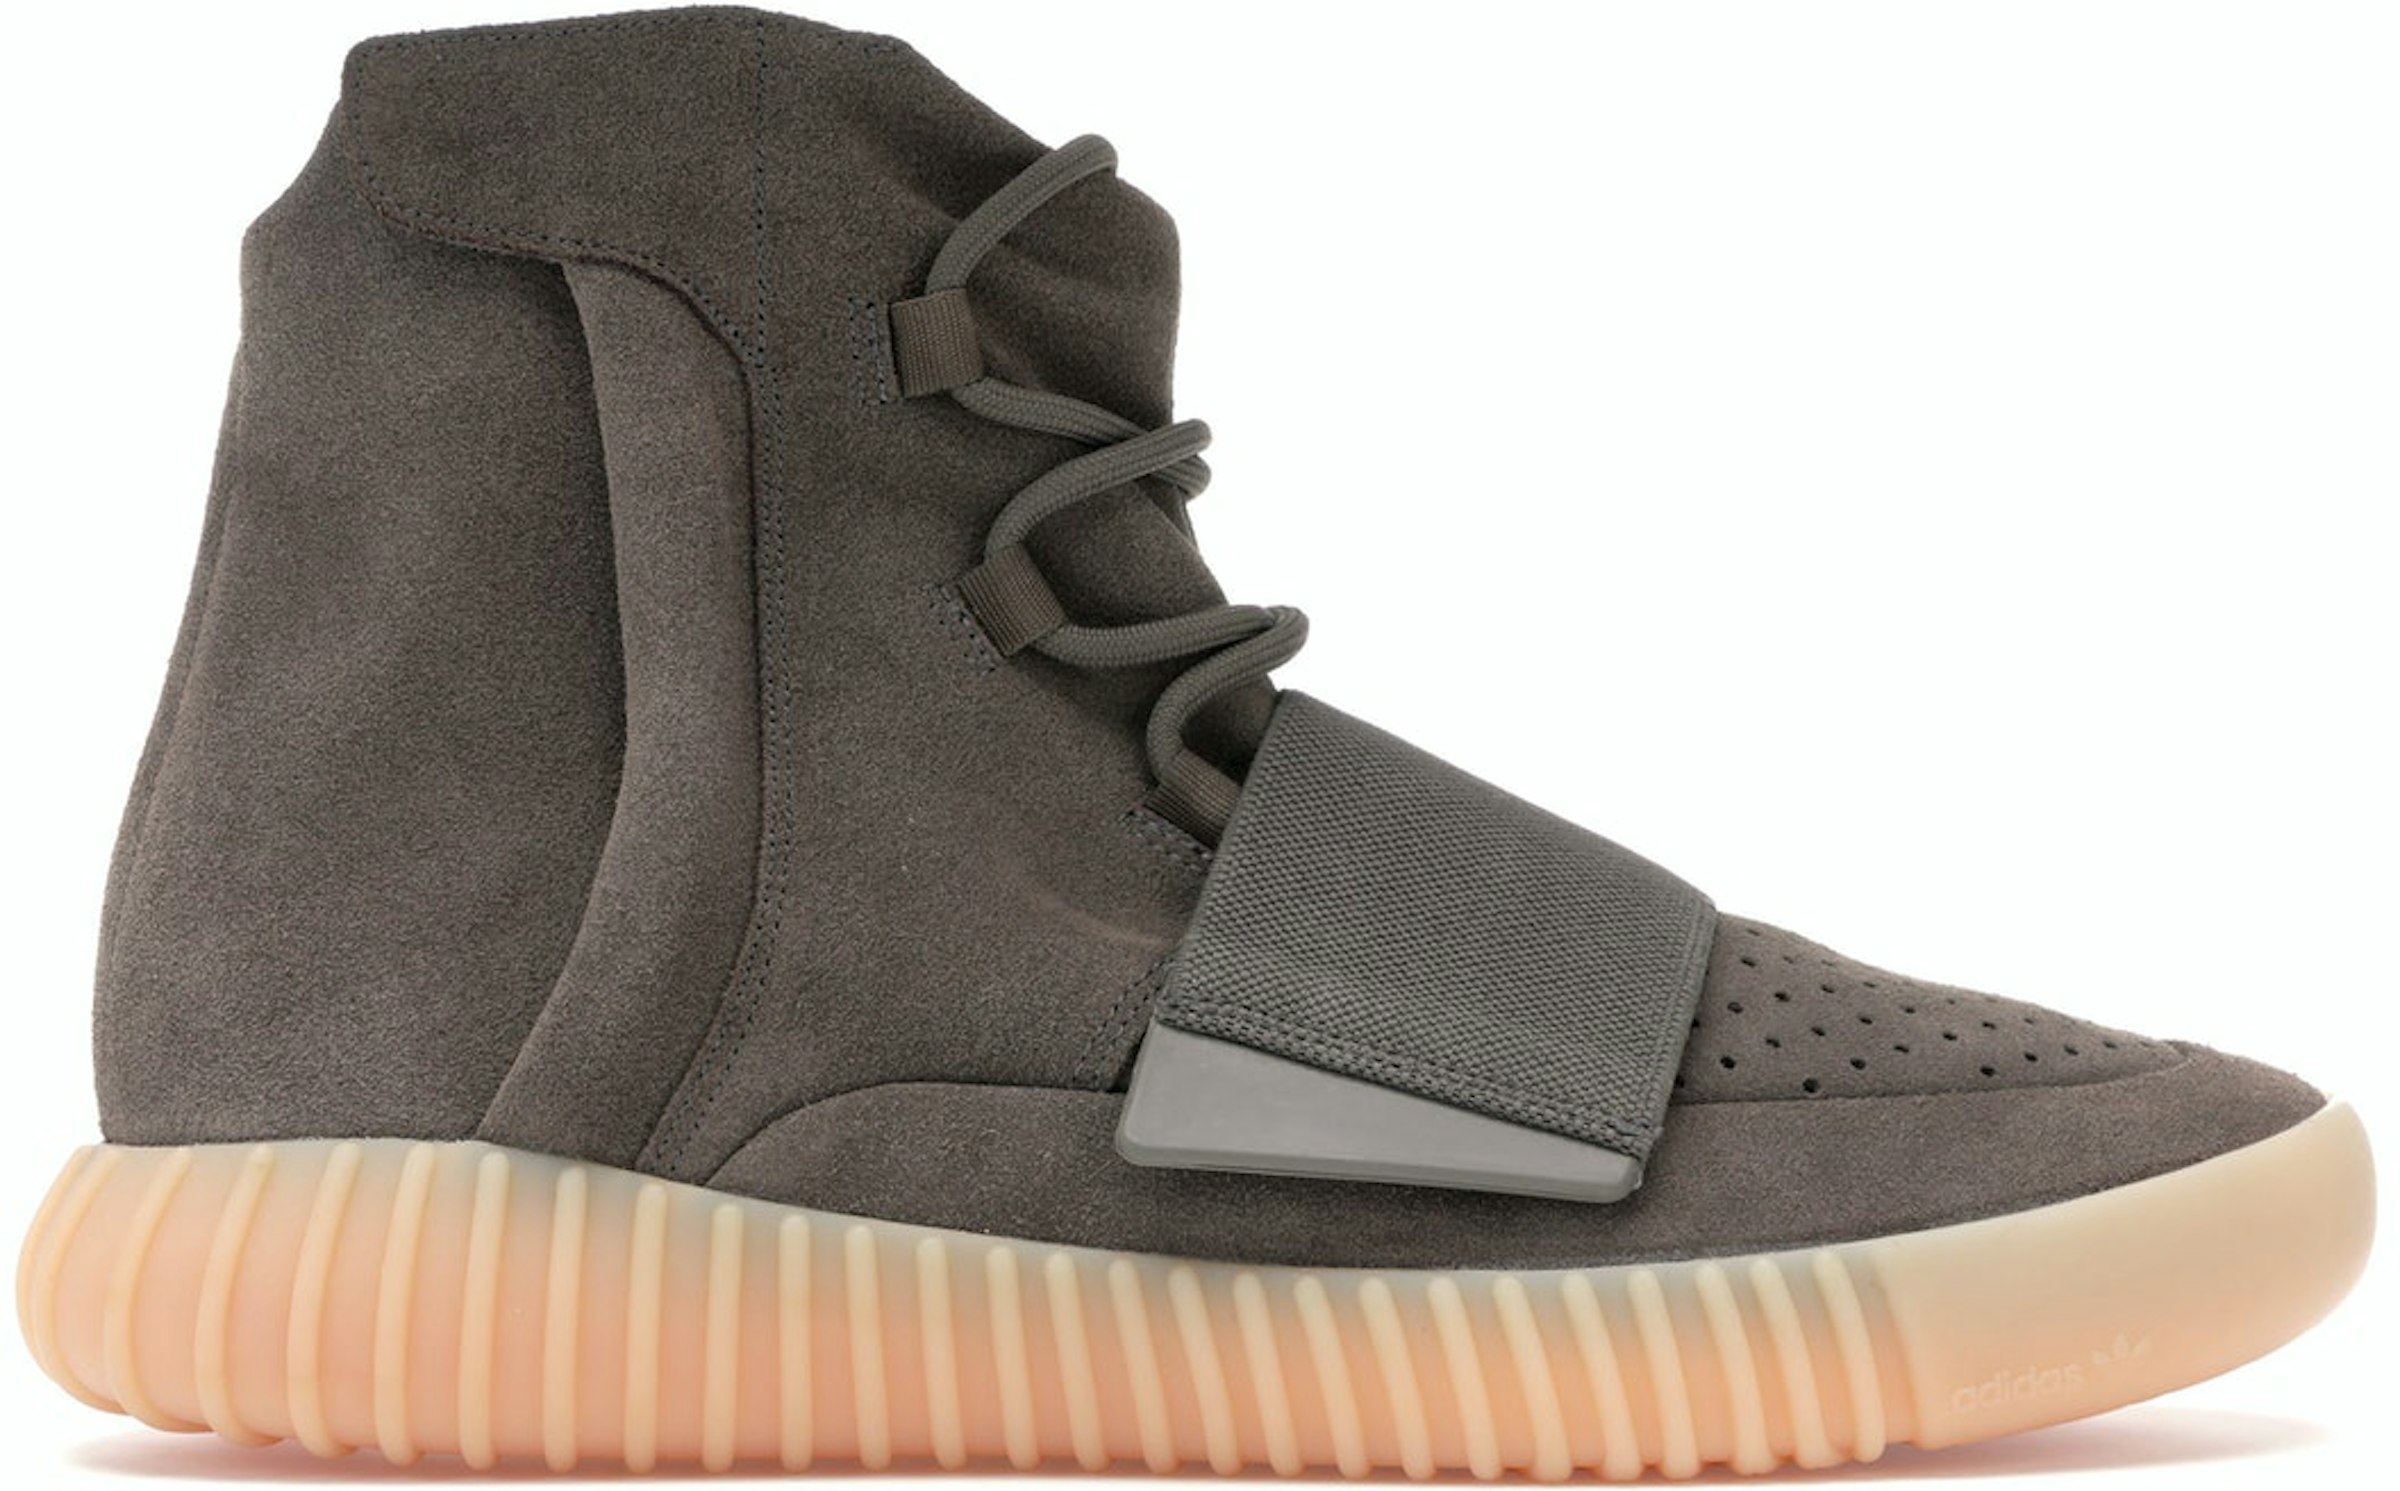 adidas Yeezy Boost Light Brown Gum (Chocolate) Men's - BY2456 - US